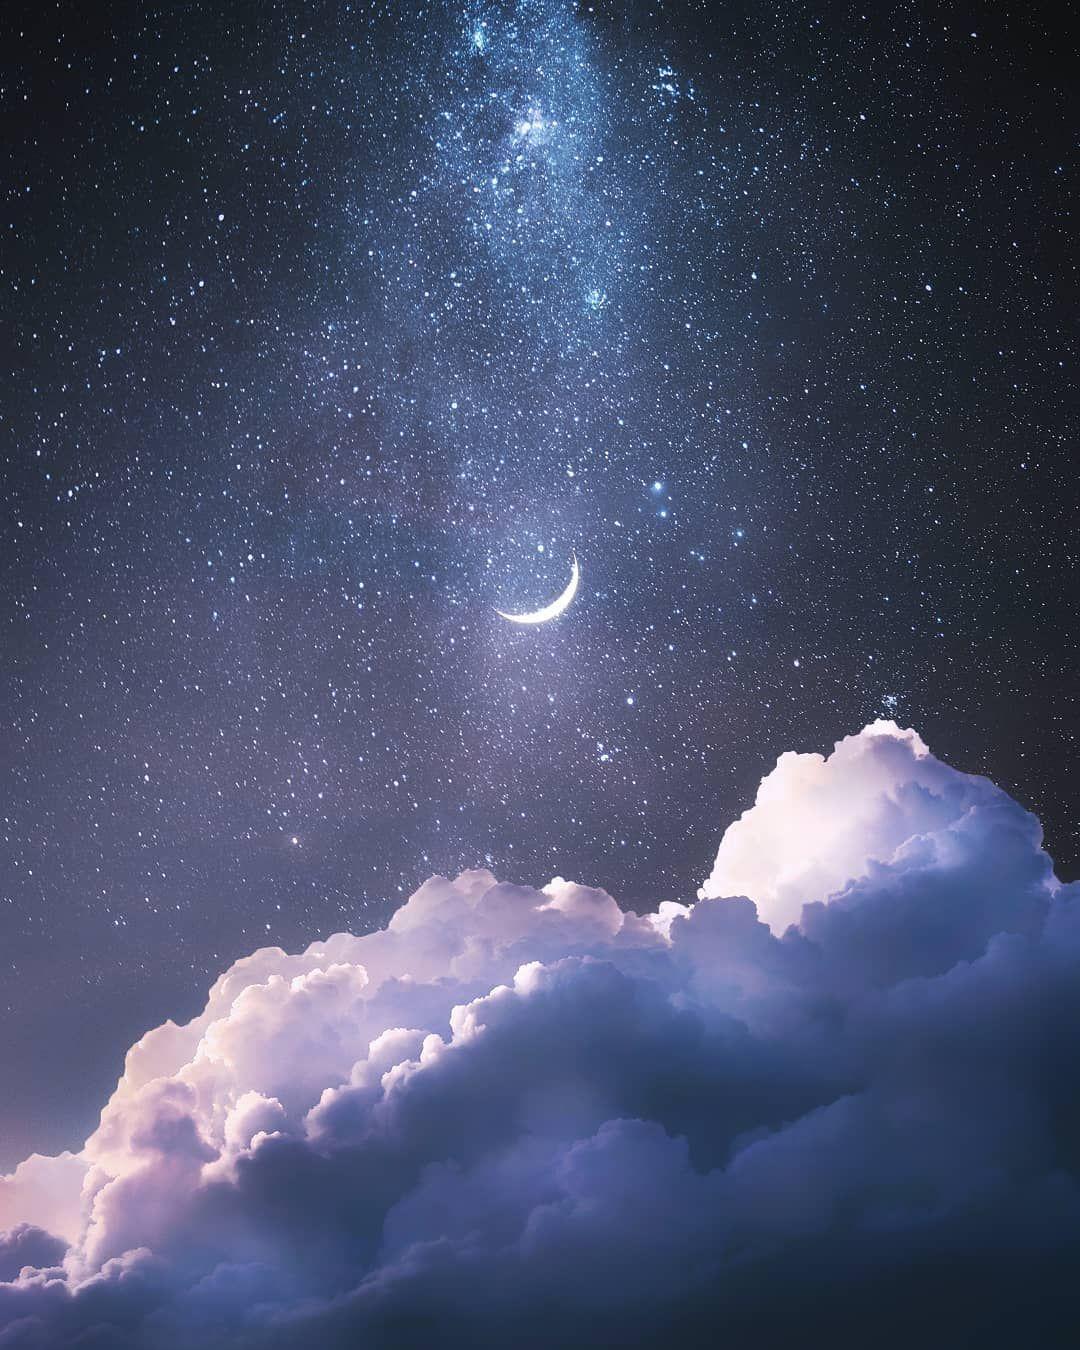 Aesthetic Night Sky Wallpapers - Wallpaper Cave